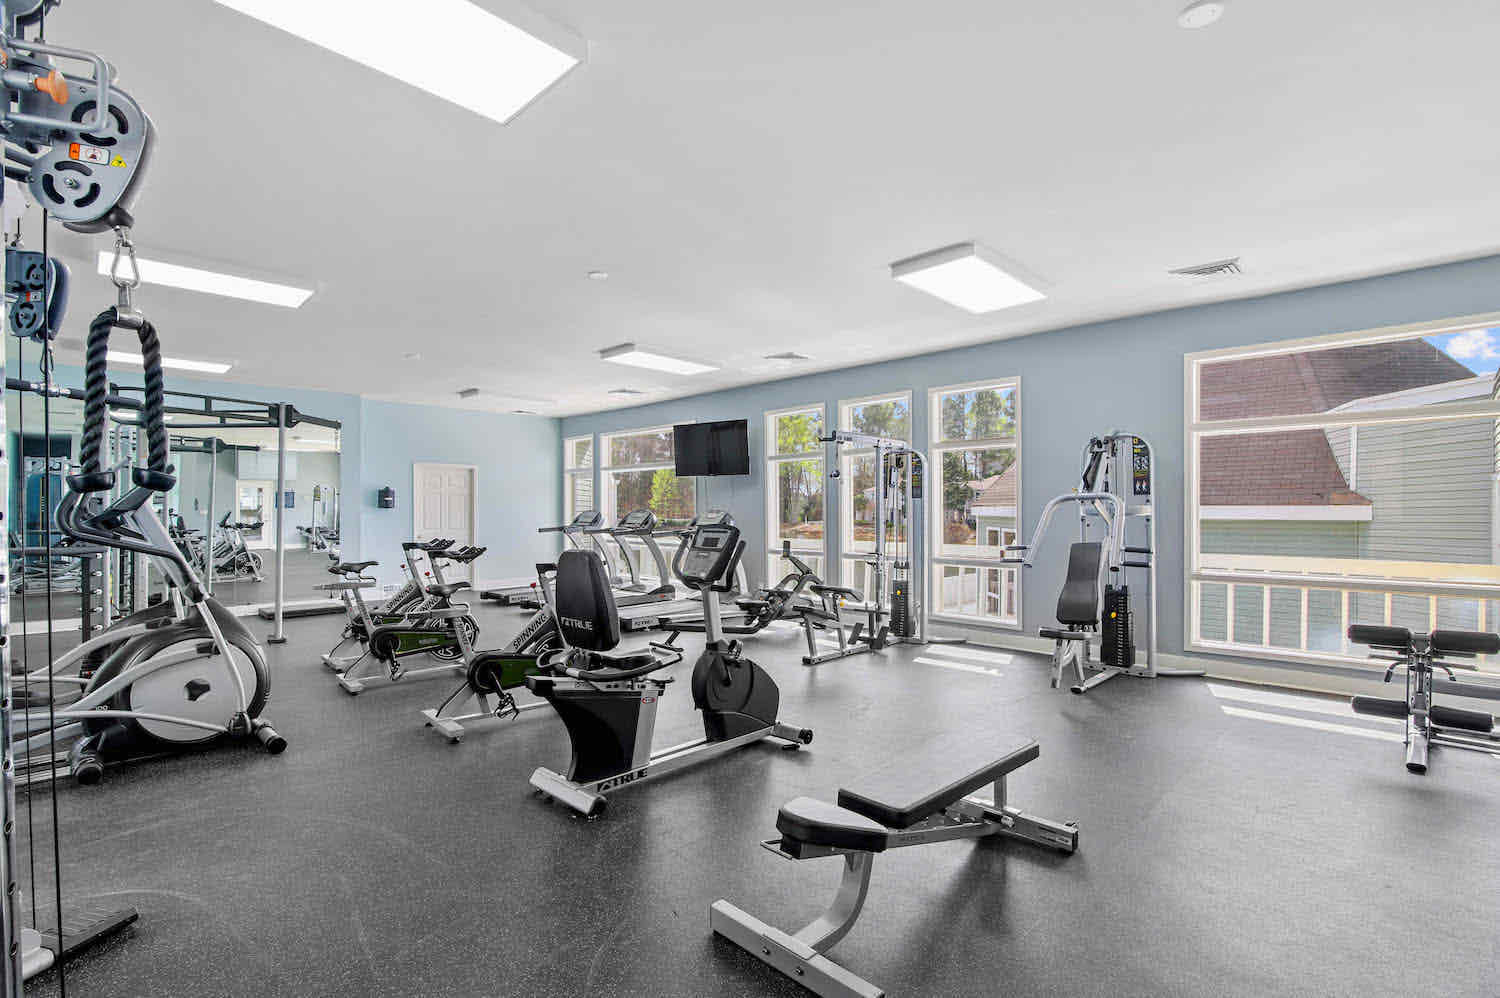 Weight lifting equipment in fitness center